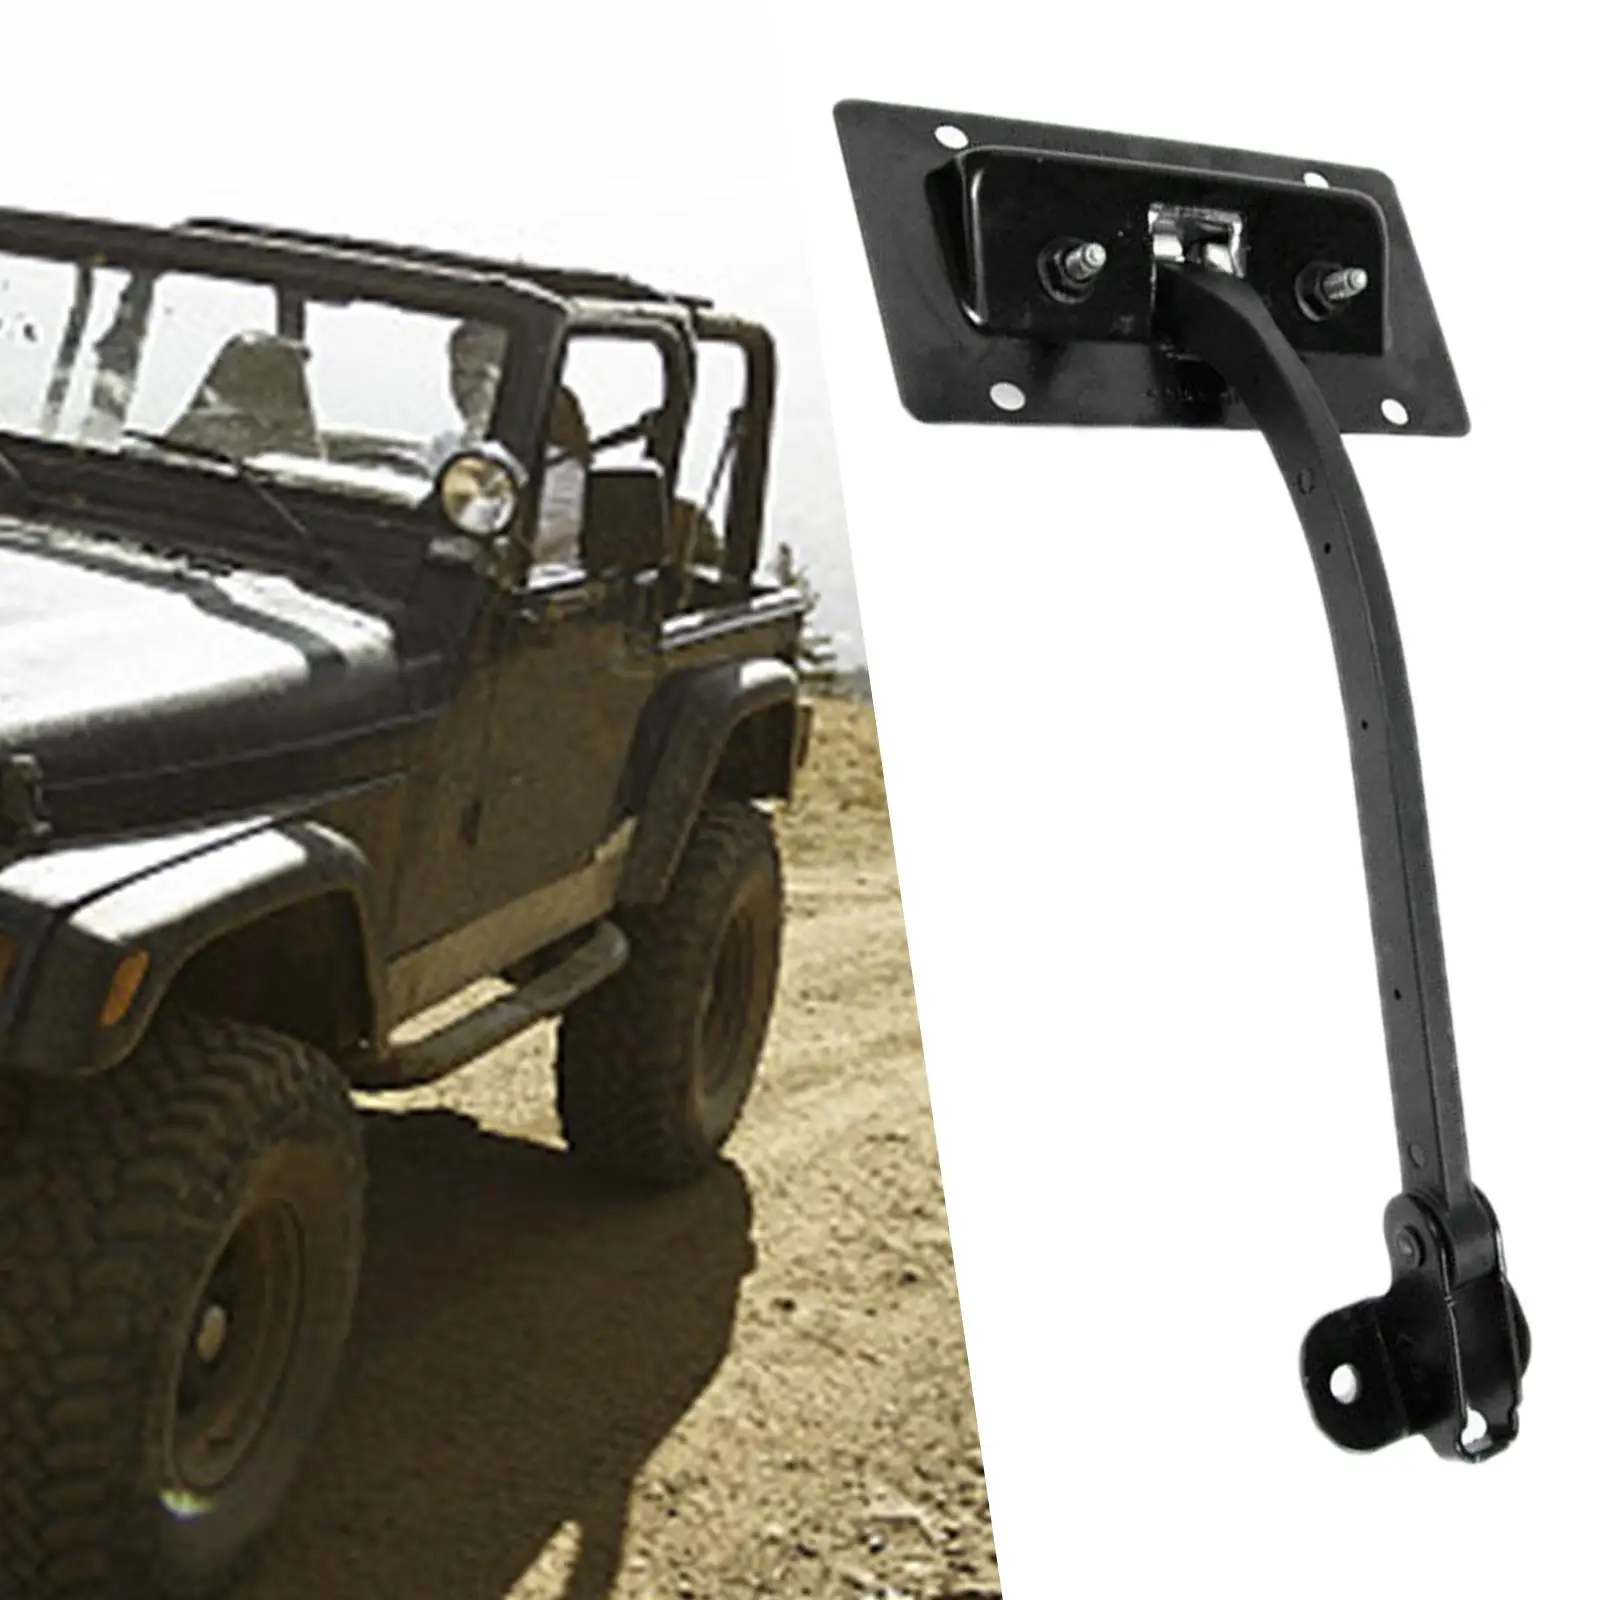 Retaining Strap 4589890AC Replacement Easy Installation Tailgate Check Strap Retaining Arm for Jeep Wrangler JK 2011-2018